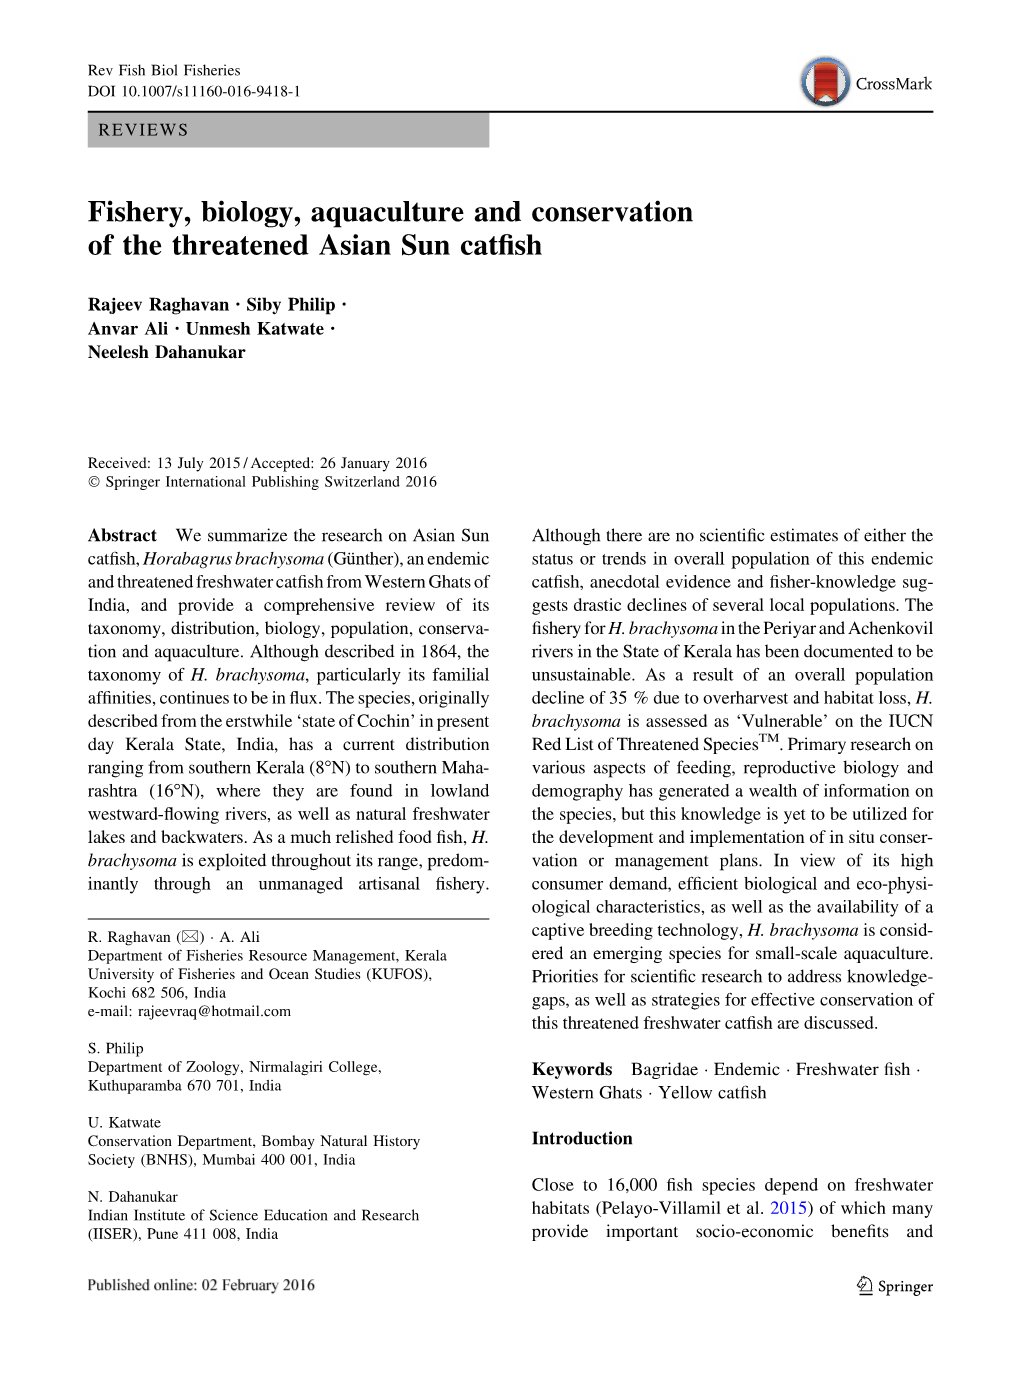 Fishery, Biology, Aquaculture and Conservation of the Threatened Asian Sun Catﬁsh